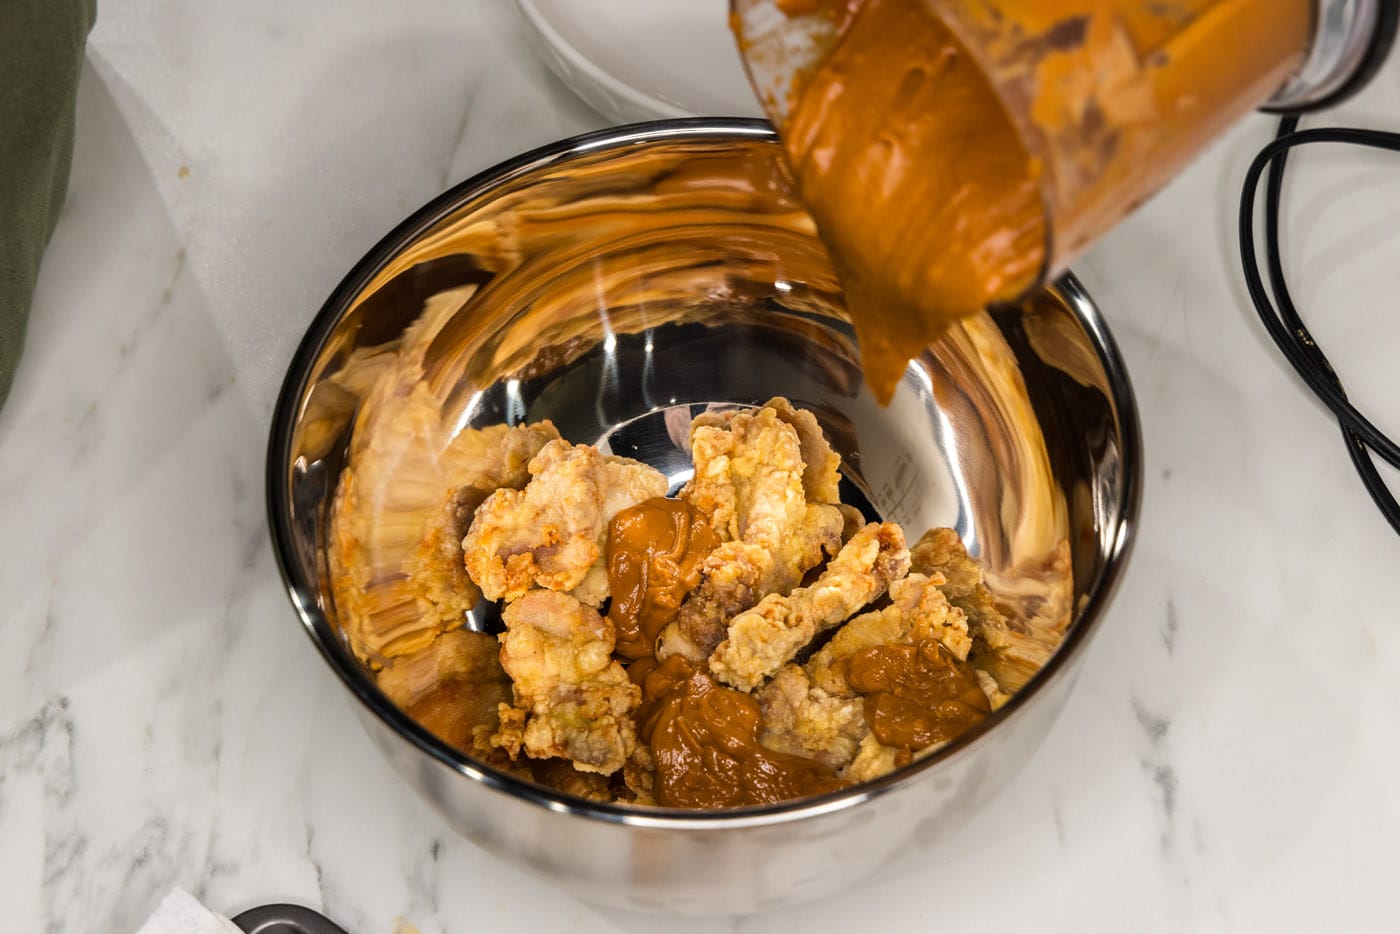 pouring peanut butter sauce over fried chicken